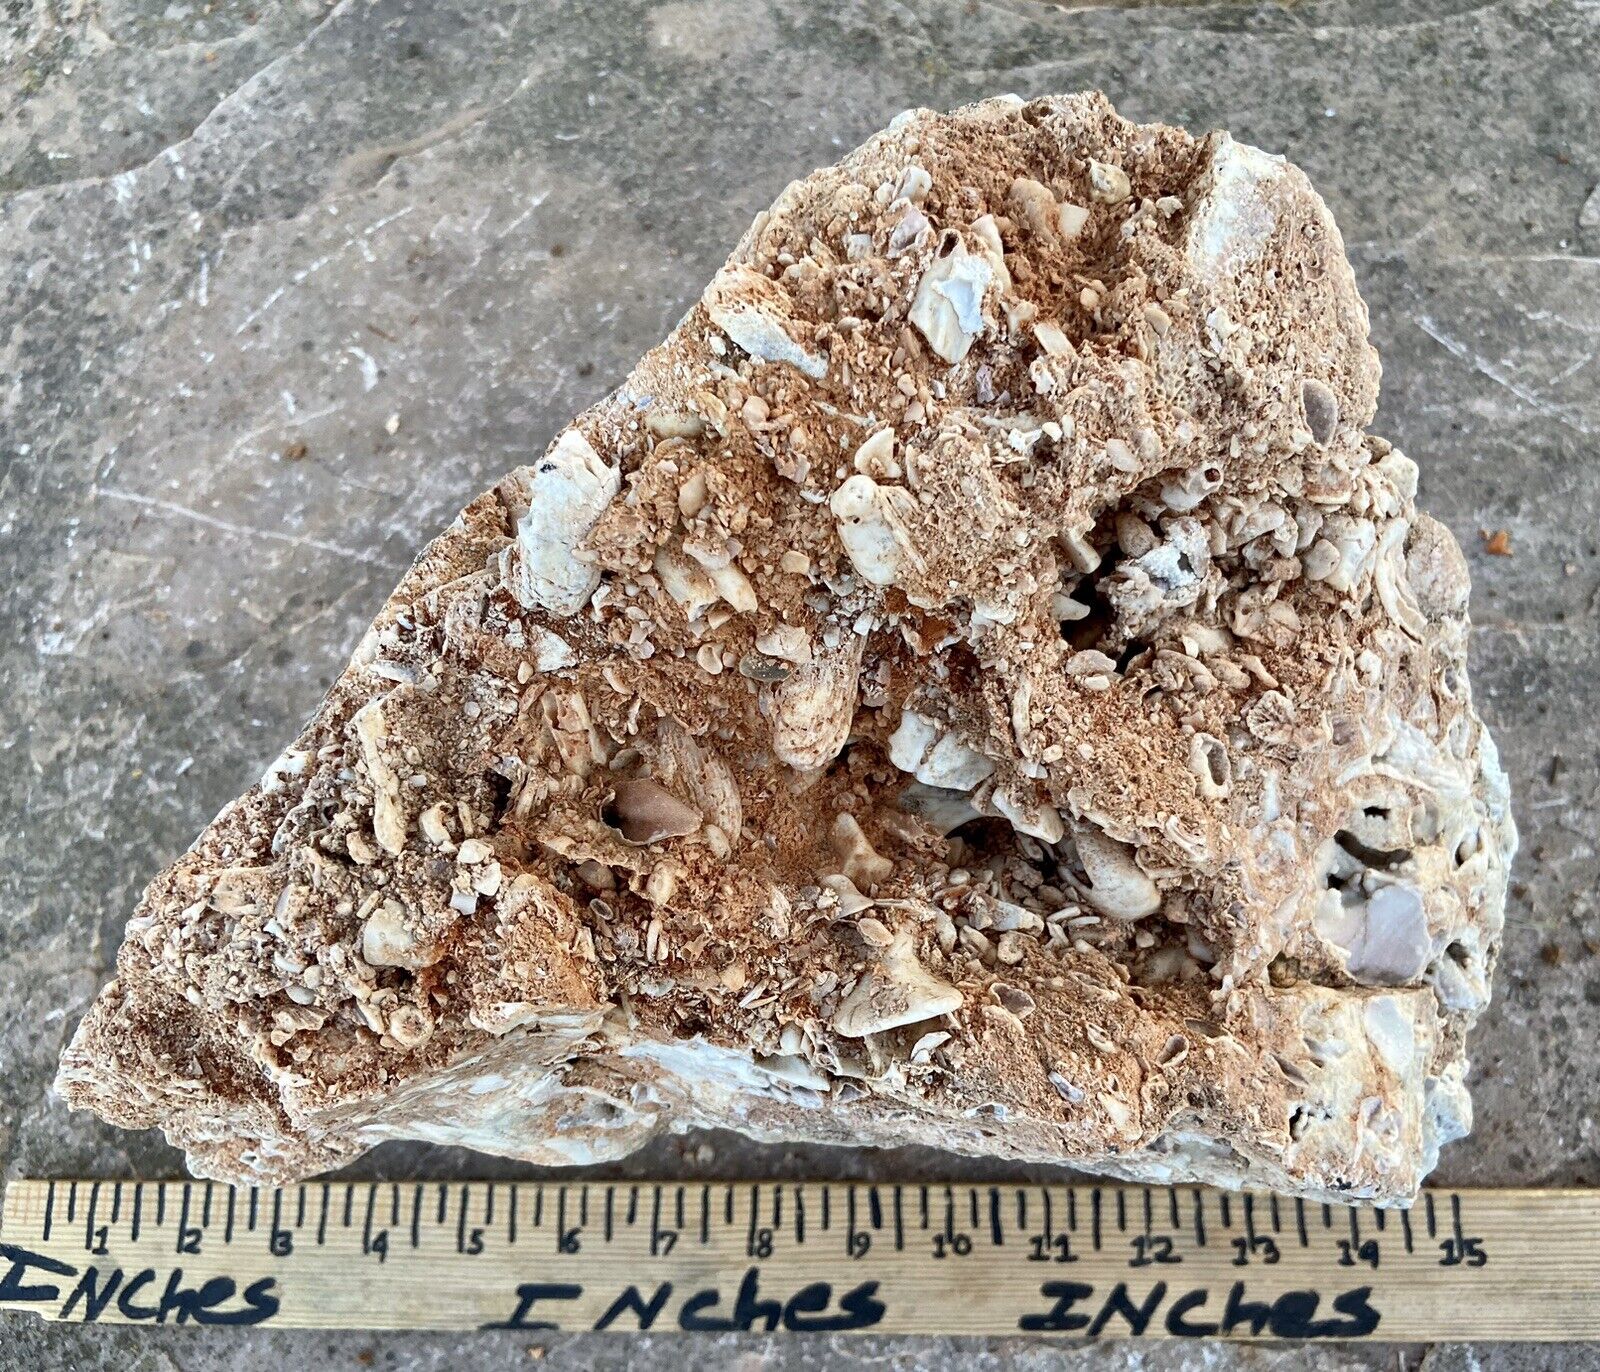 *UNIQUE* Big 22 Lb Sparkling Crystalized Sea Fossil Conglomerate Display Rock TX